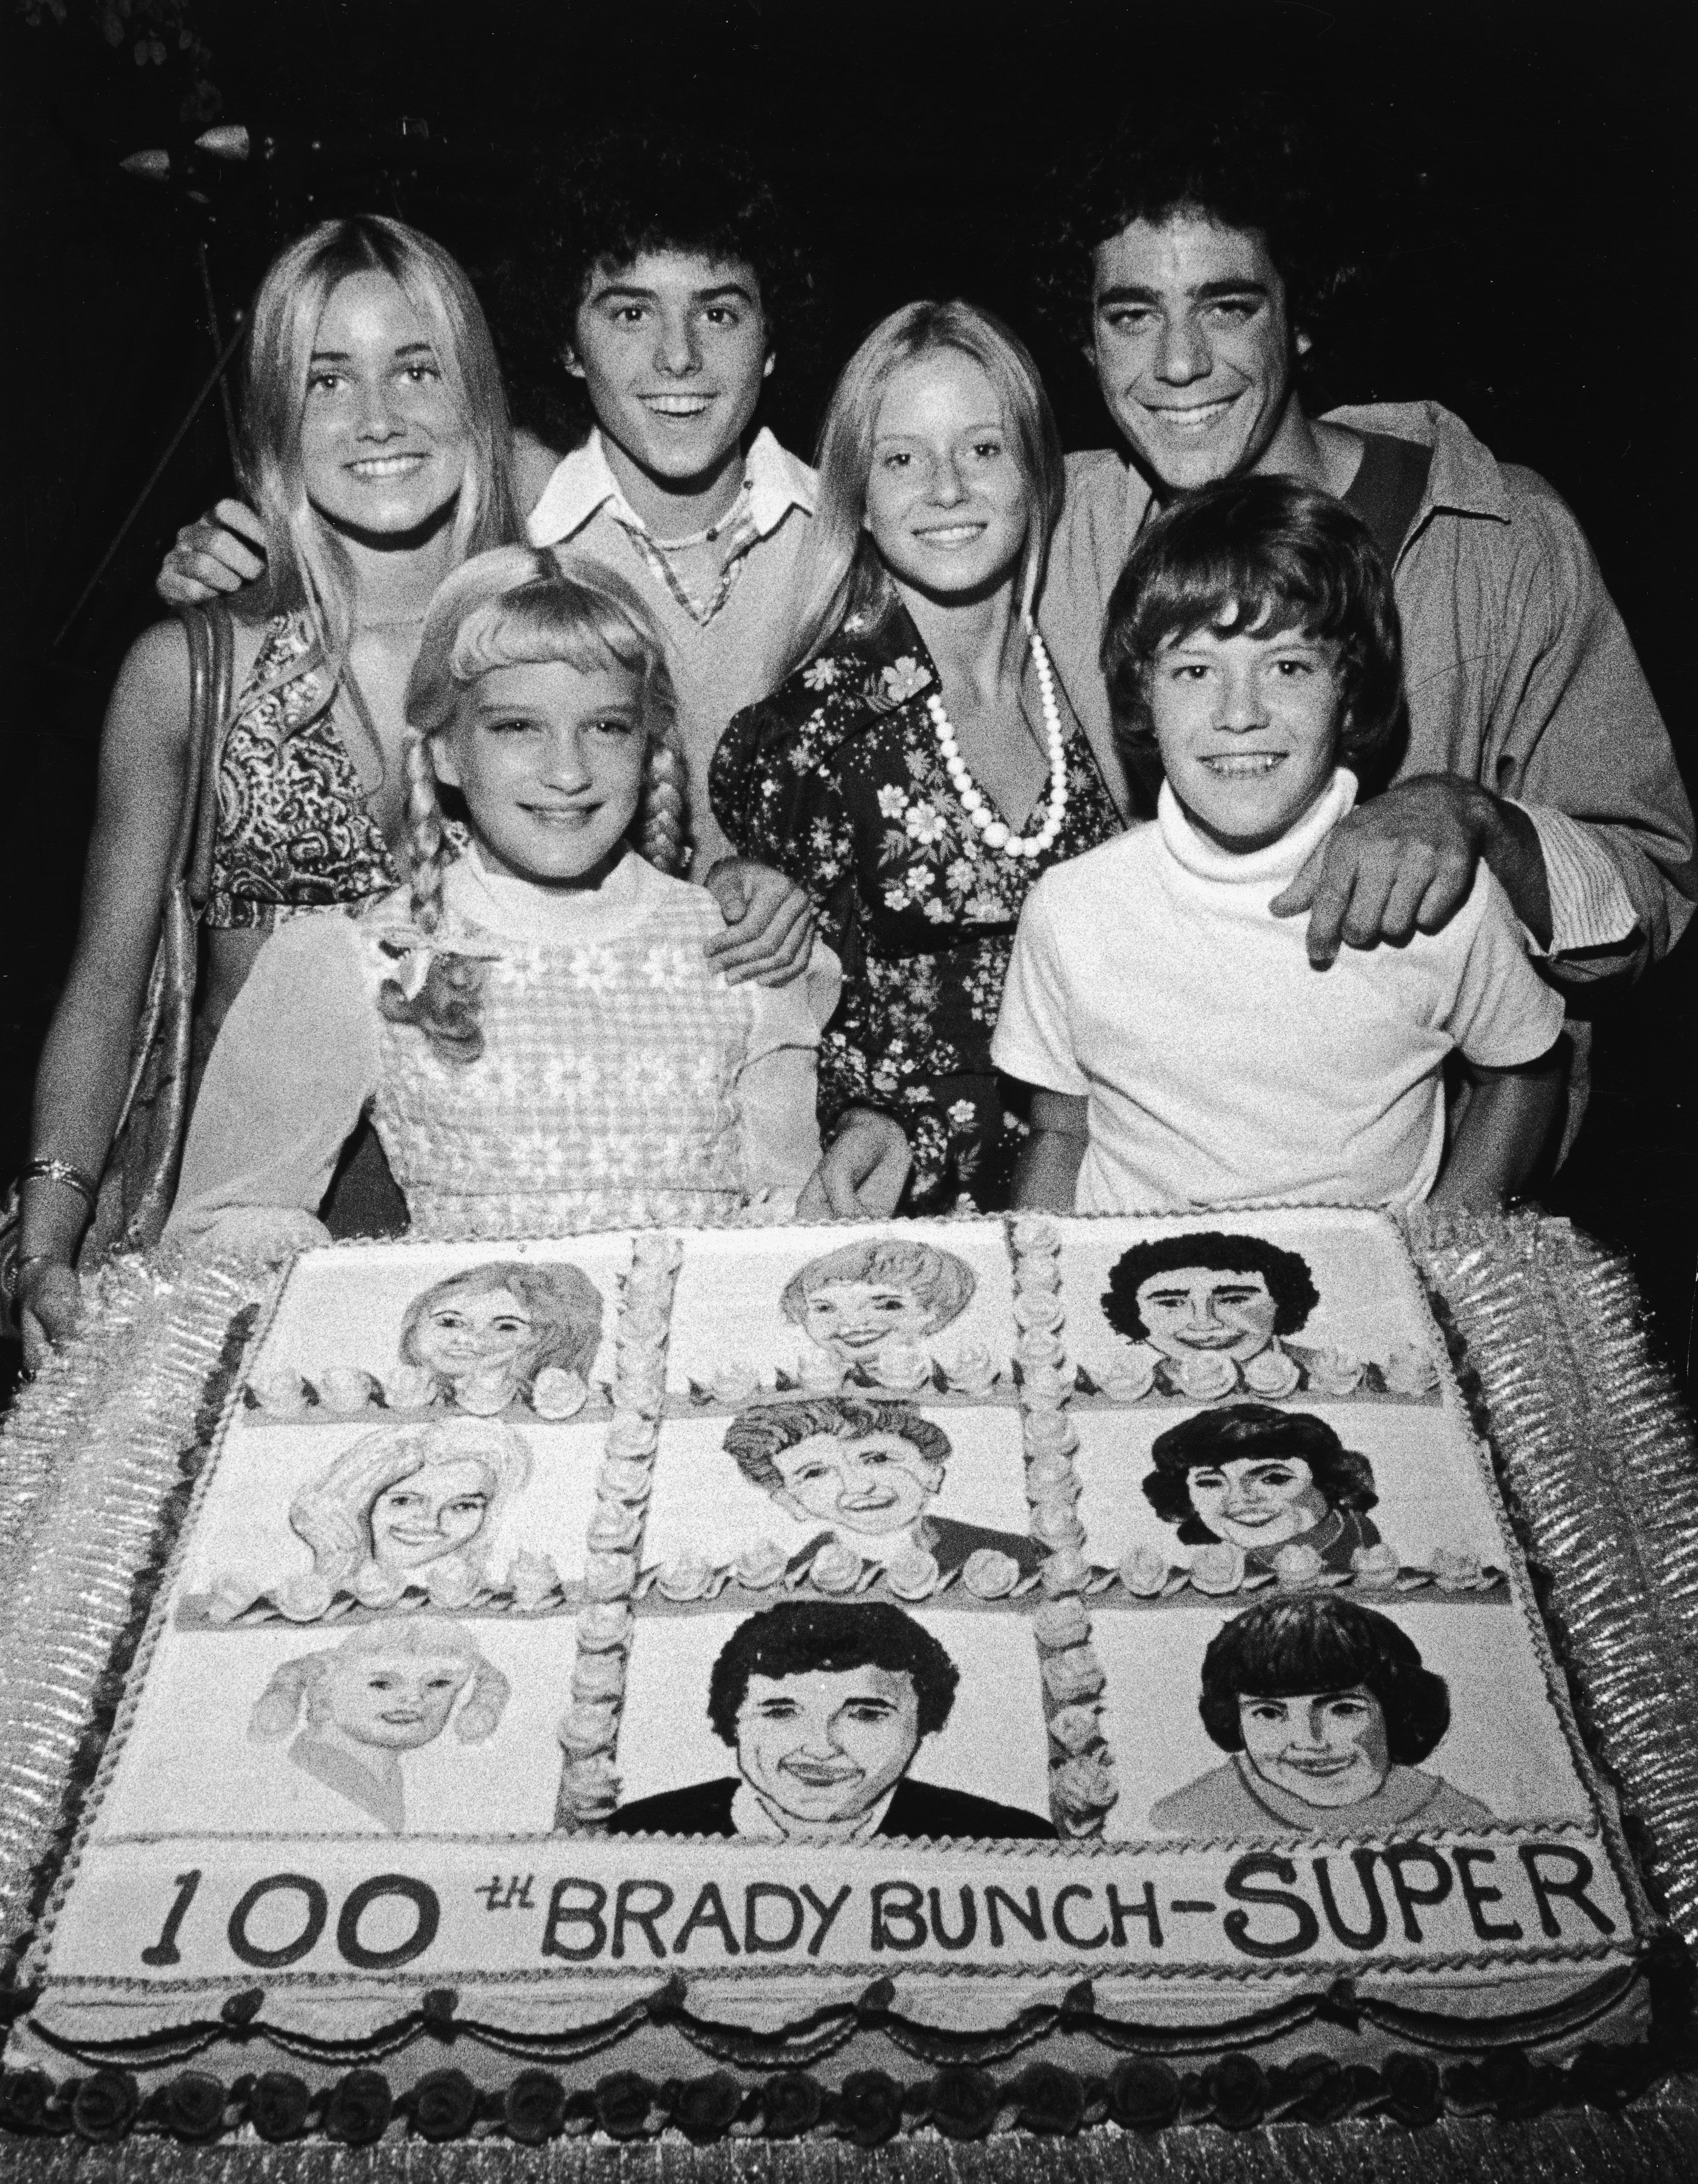 The children of "The Brady Bunch" Maureen McCormick, Susan Olsen, Christopher Knight, Eve Plumb, Barry Williams and Mike Lookinland pose with a cake to celebrate the 100th episode in 1973 | Photo: Getty Images